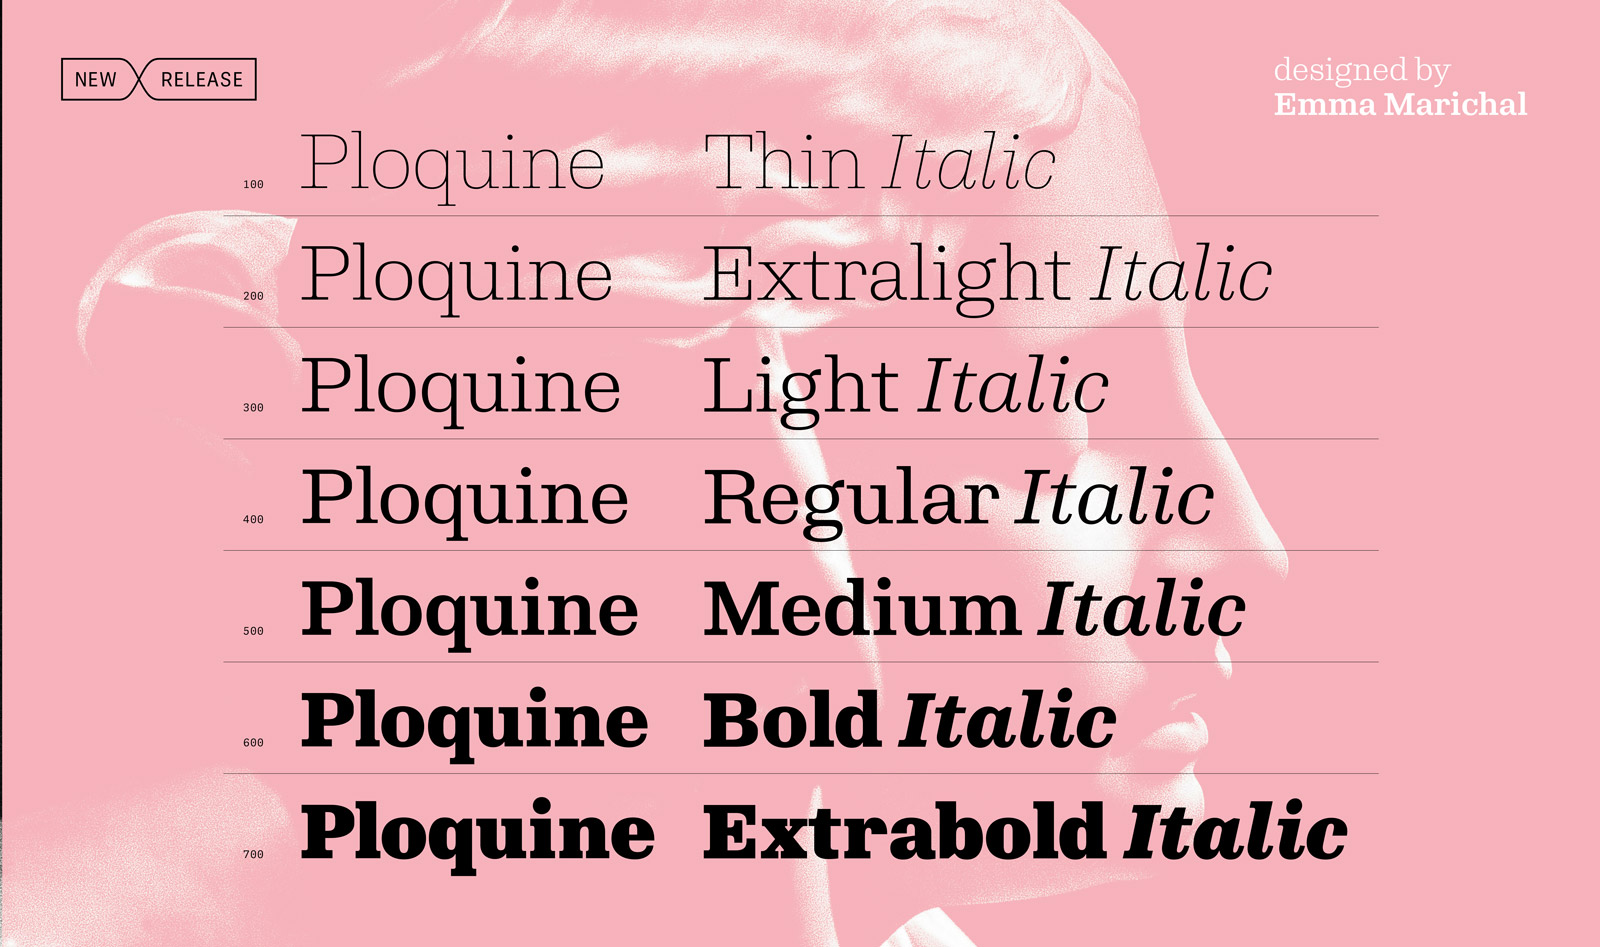 Ploquine by Emma Marichal new release